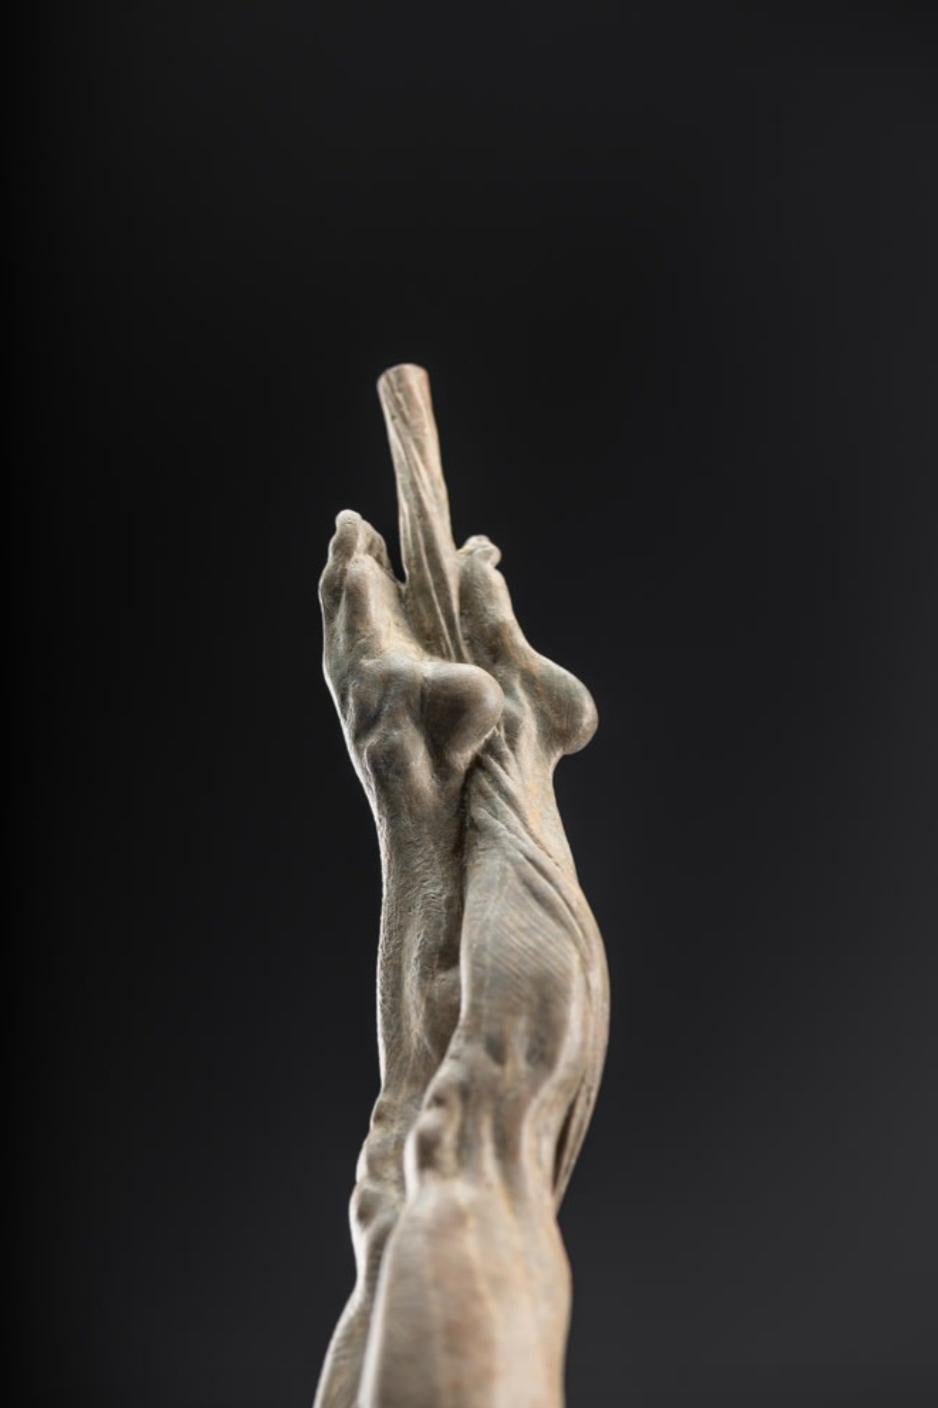 As with Richard MacDonald’s entire Cirque series, Transcendance has many layers of metaphor and meaning to challenge and intrigue viewers. Transcendance is a striking example of Richard MacDonald’s rare gift for capturing the power and vigor of an